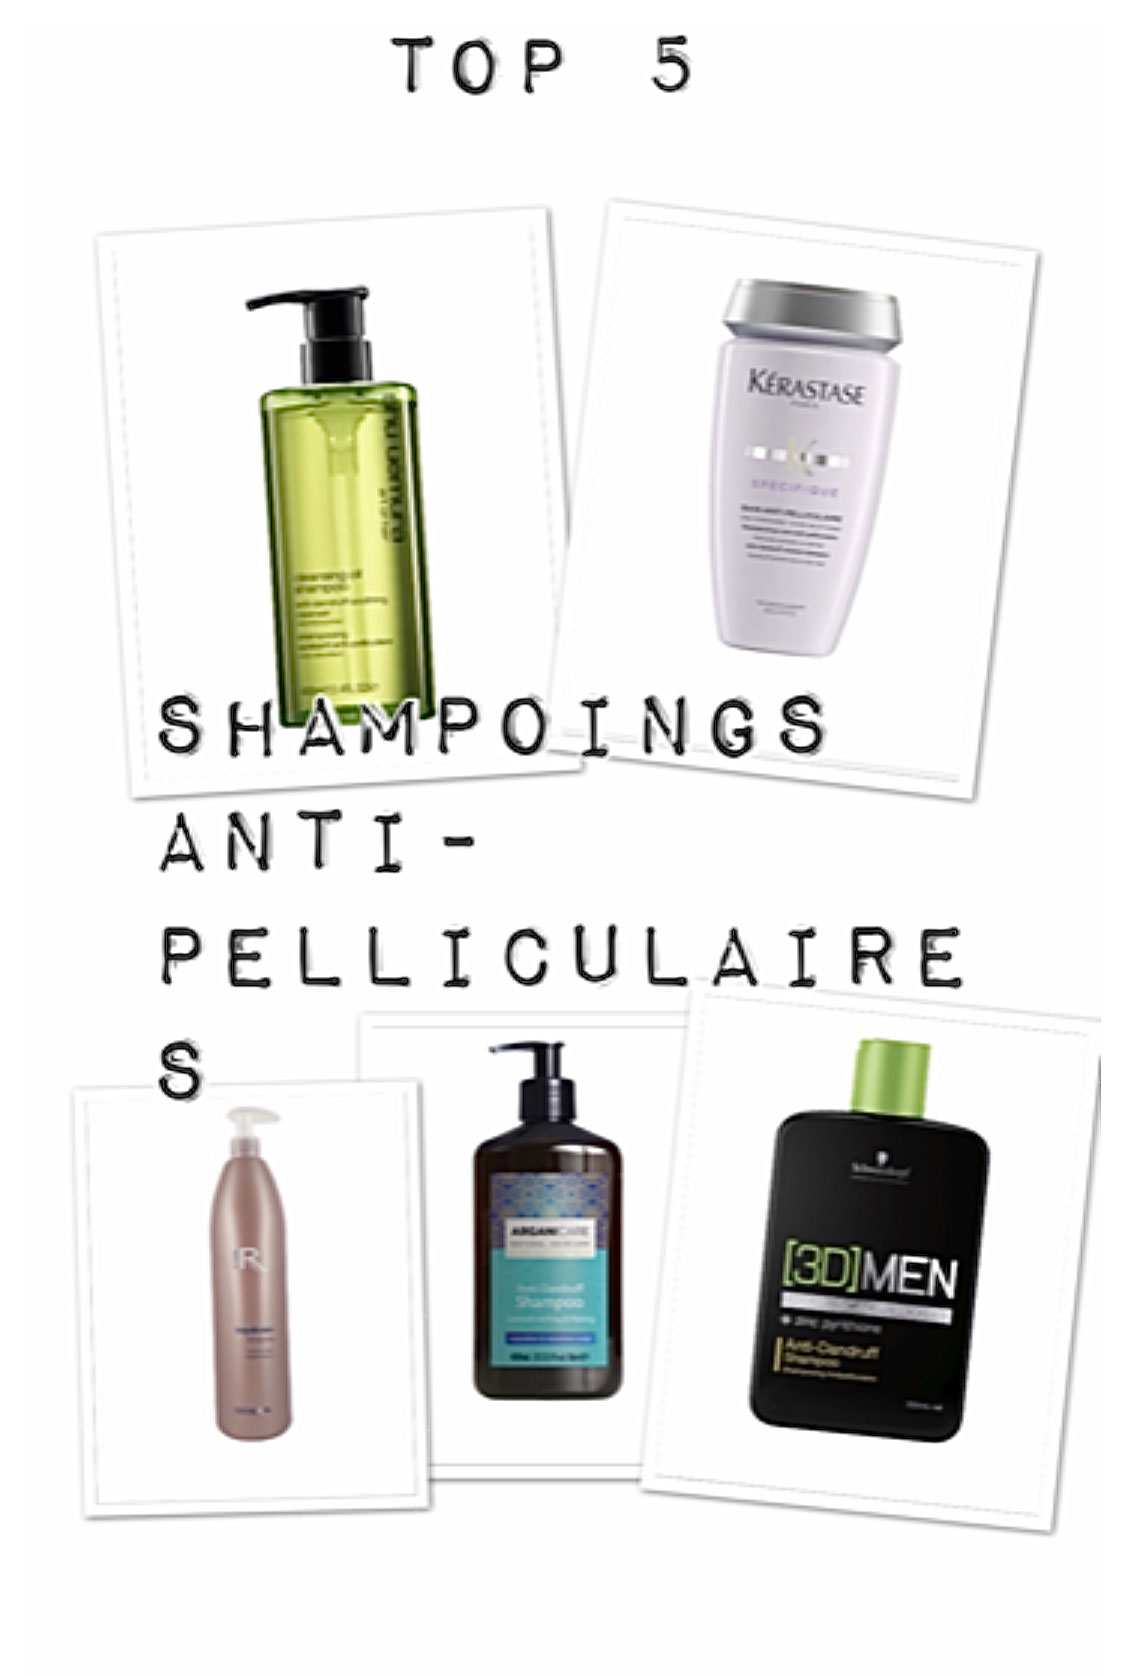 TOP 5 Shampooings Anti-Pelliculaires